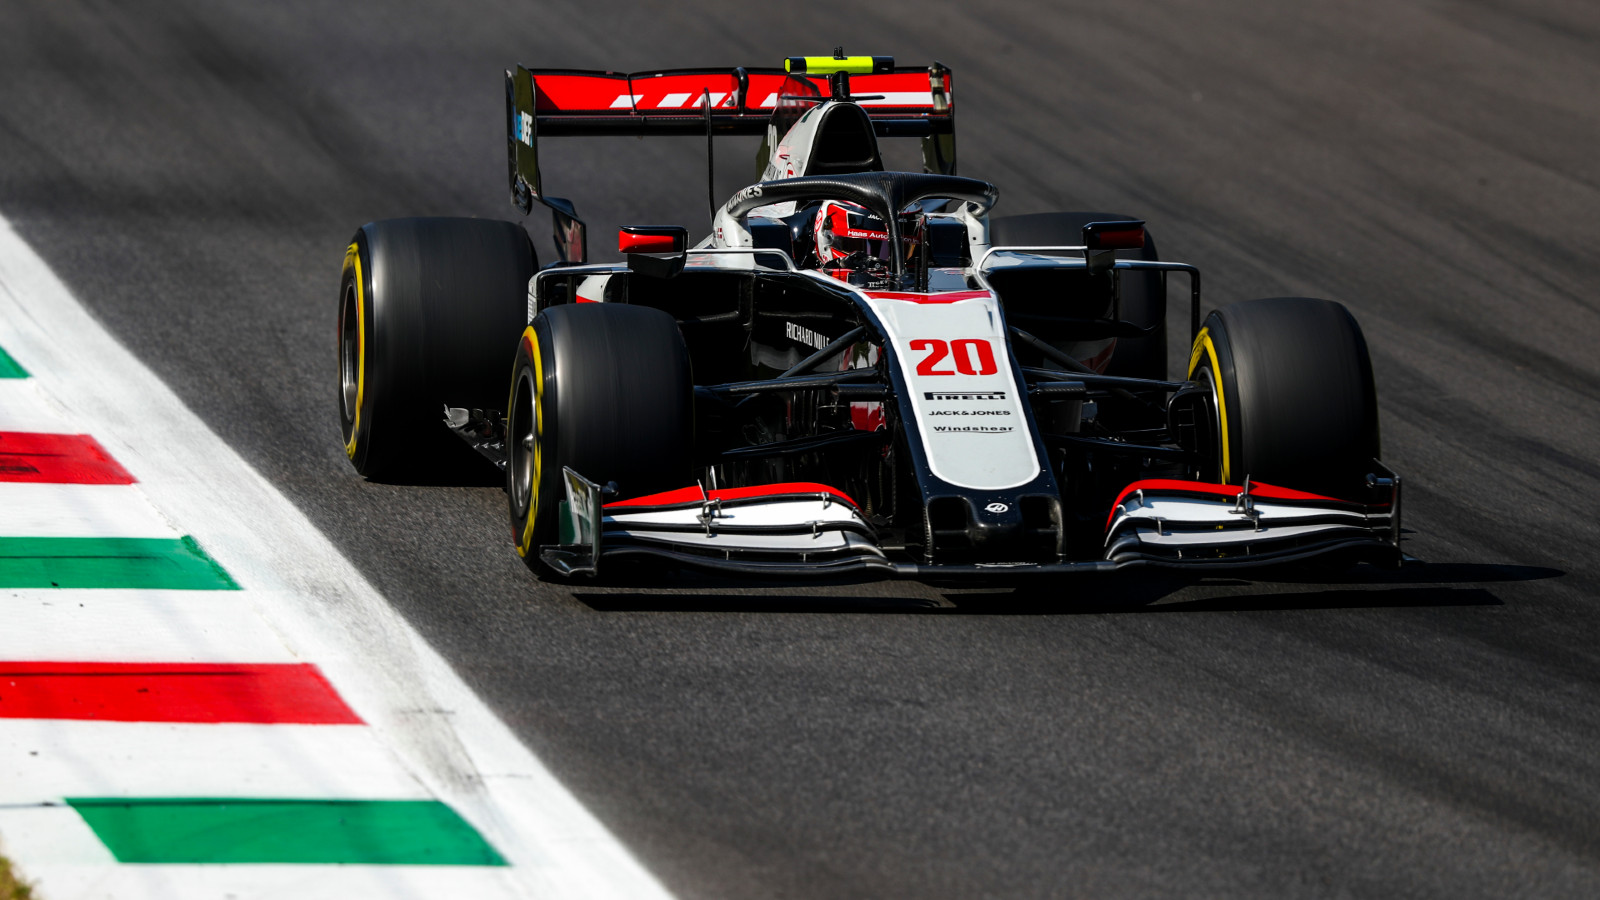 Kevin Magnussen driving his 2020 Haas VF-20 at the Italian Grand Prix.